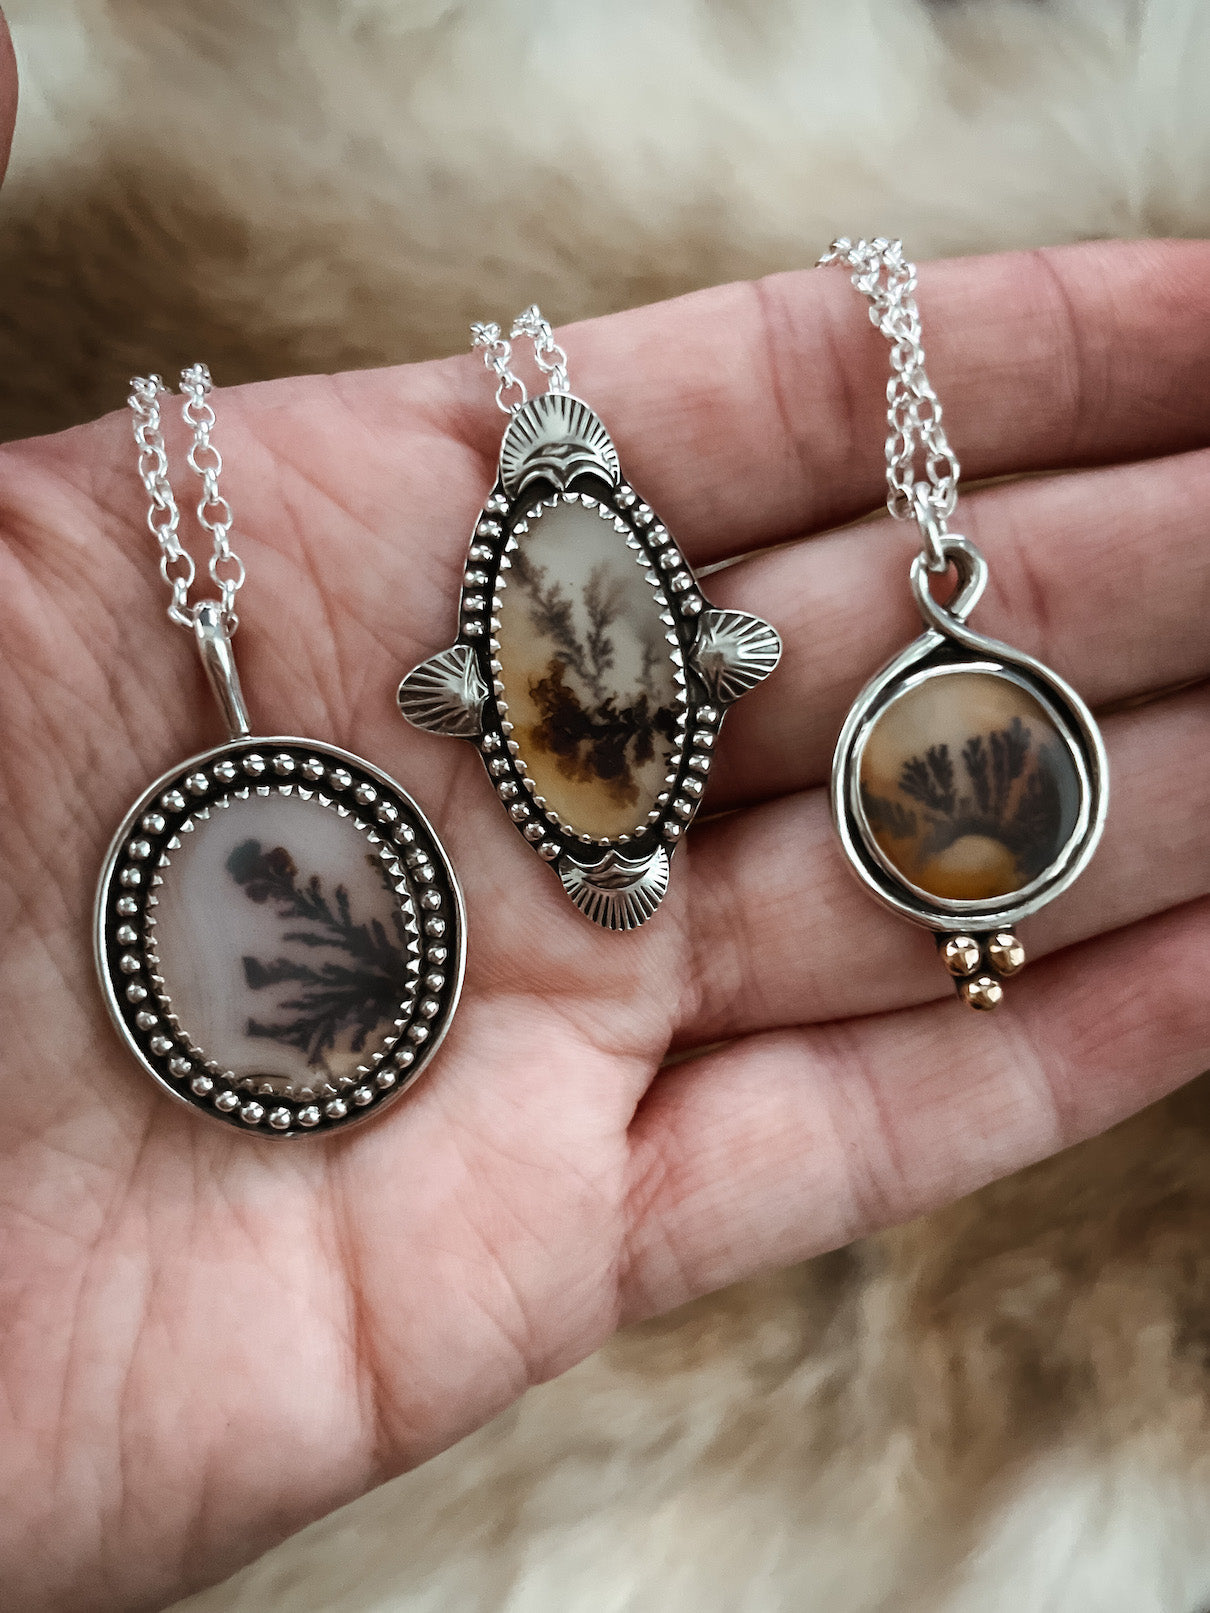 Dendritic Agate Sterling Silver Necklaces - 3 versions shown on hand.